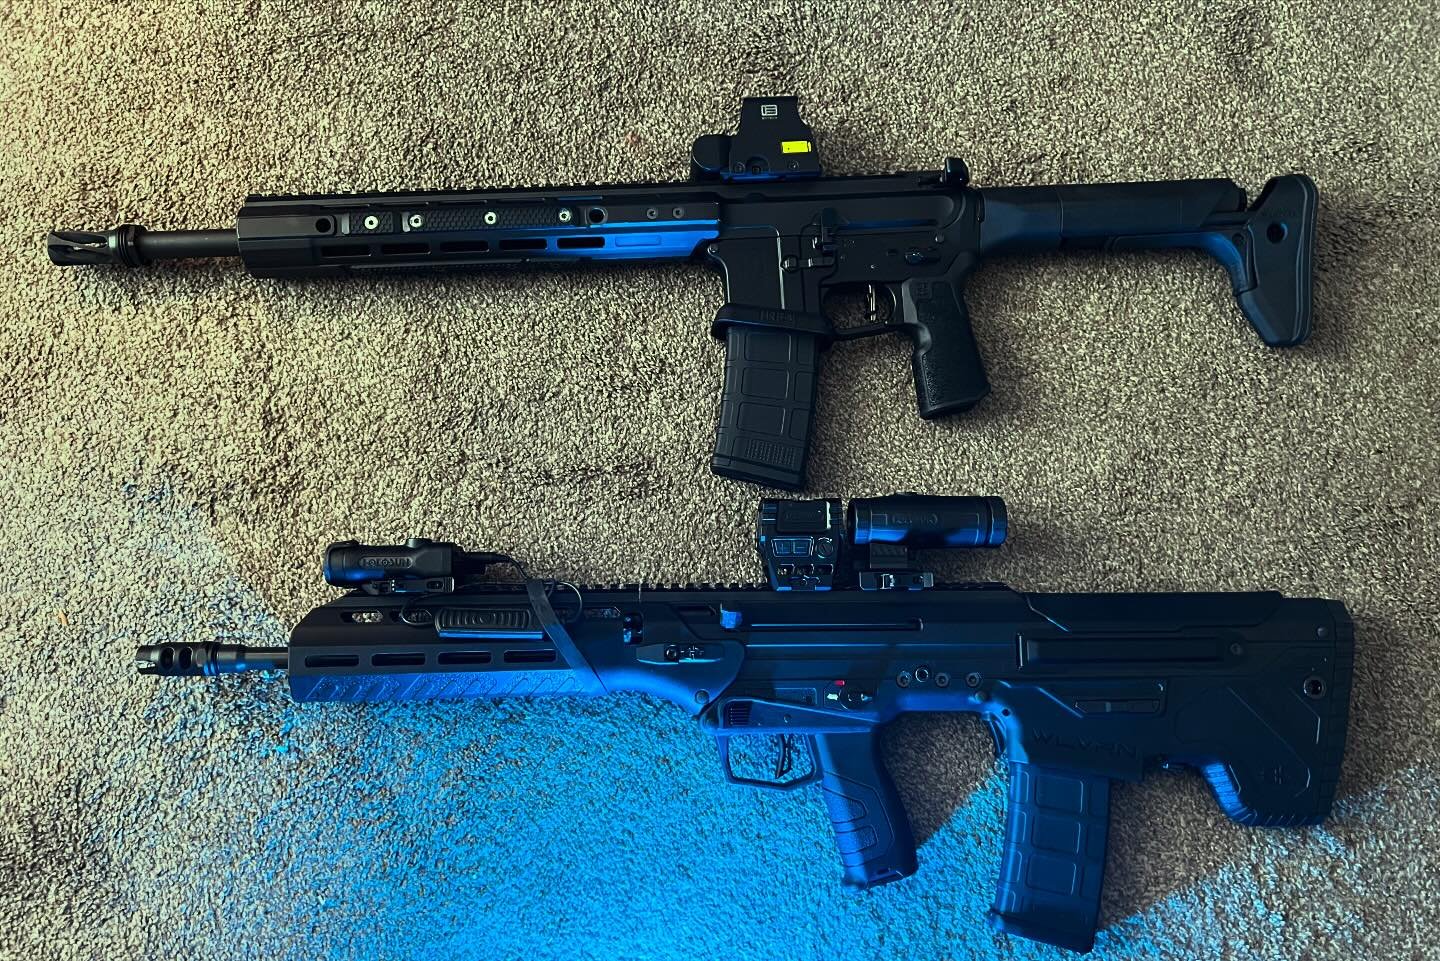 20in WLVRN Bullpup vs 16in Carbinemaxxer

Genuinely loving the vibes from both rn